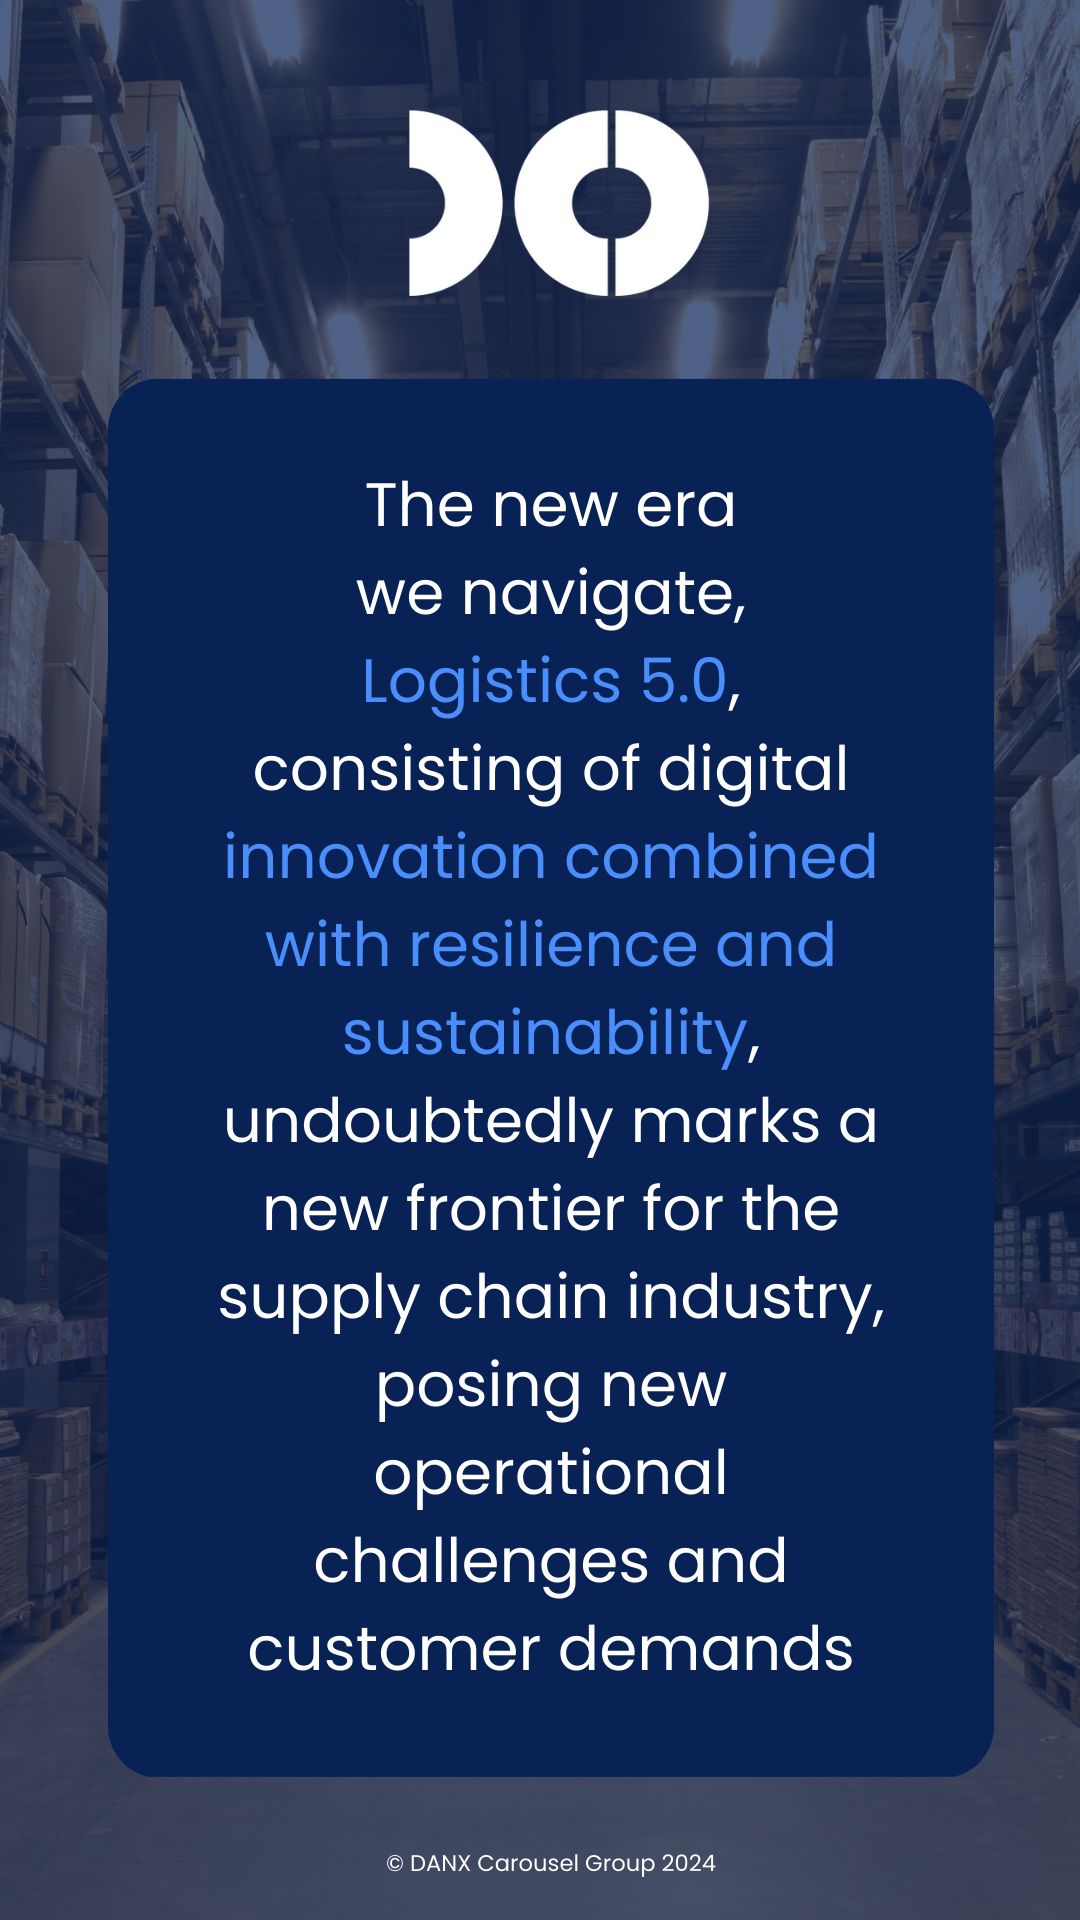 Text with warehouse blue background that says: The new era we navigate, ‘Logistics 5.0’, consisting of digital innovation combined with resilience and sustainability, undoubtedly marks a new frontier for the supply chain industry, posing new operational challenges and customer demands.